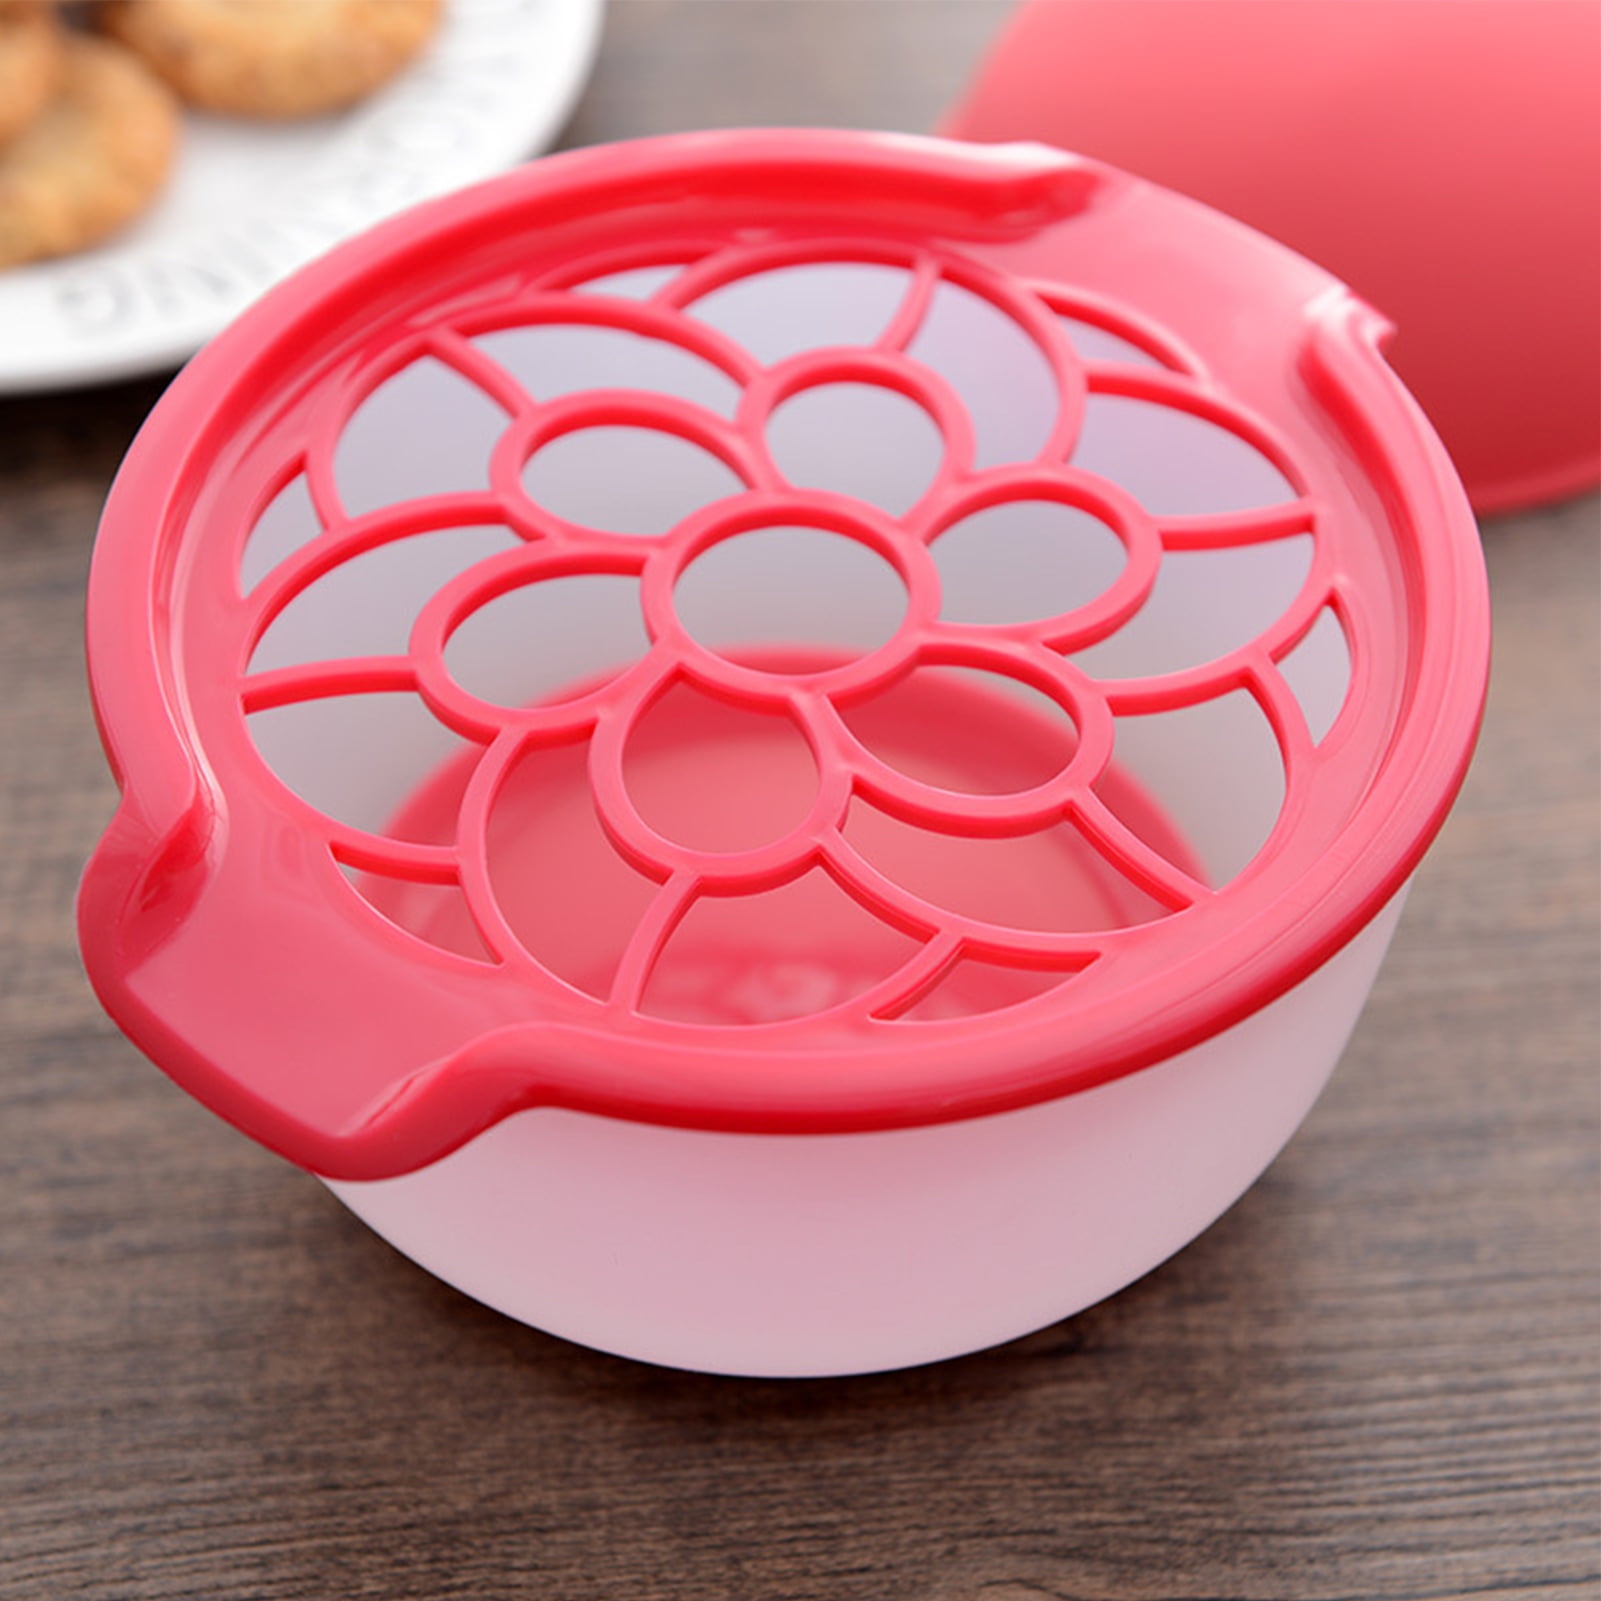  Petyoung Pomegranate Peeler PP Silicone Pomegranate Bowl Deseeder  Pomegranate Peeling Tool: Home & Kitchen